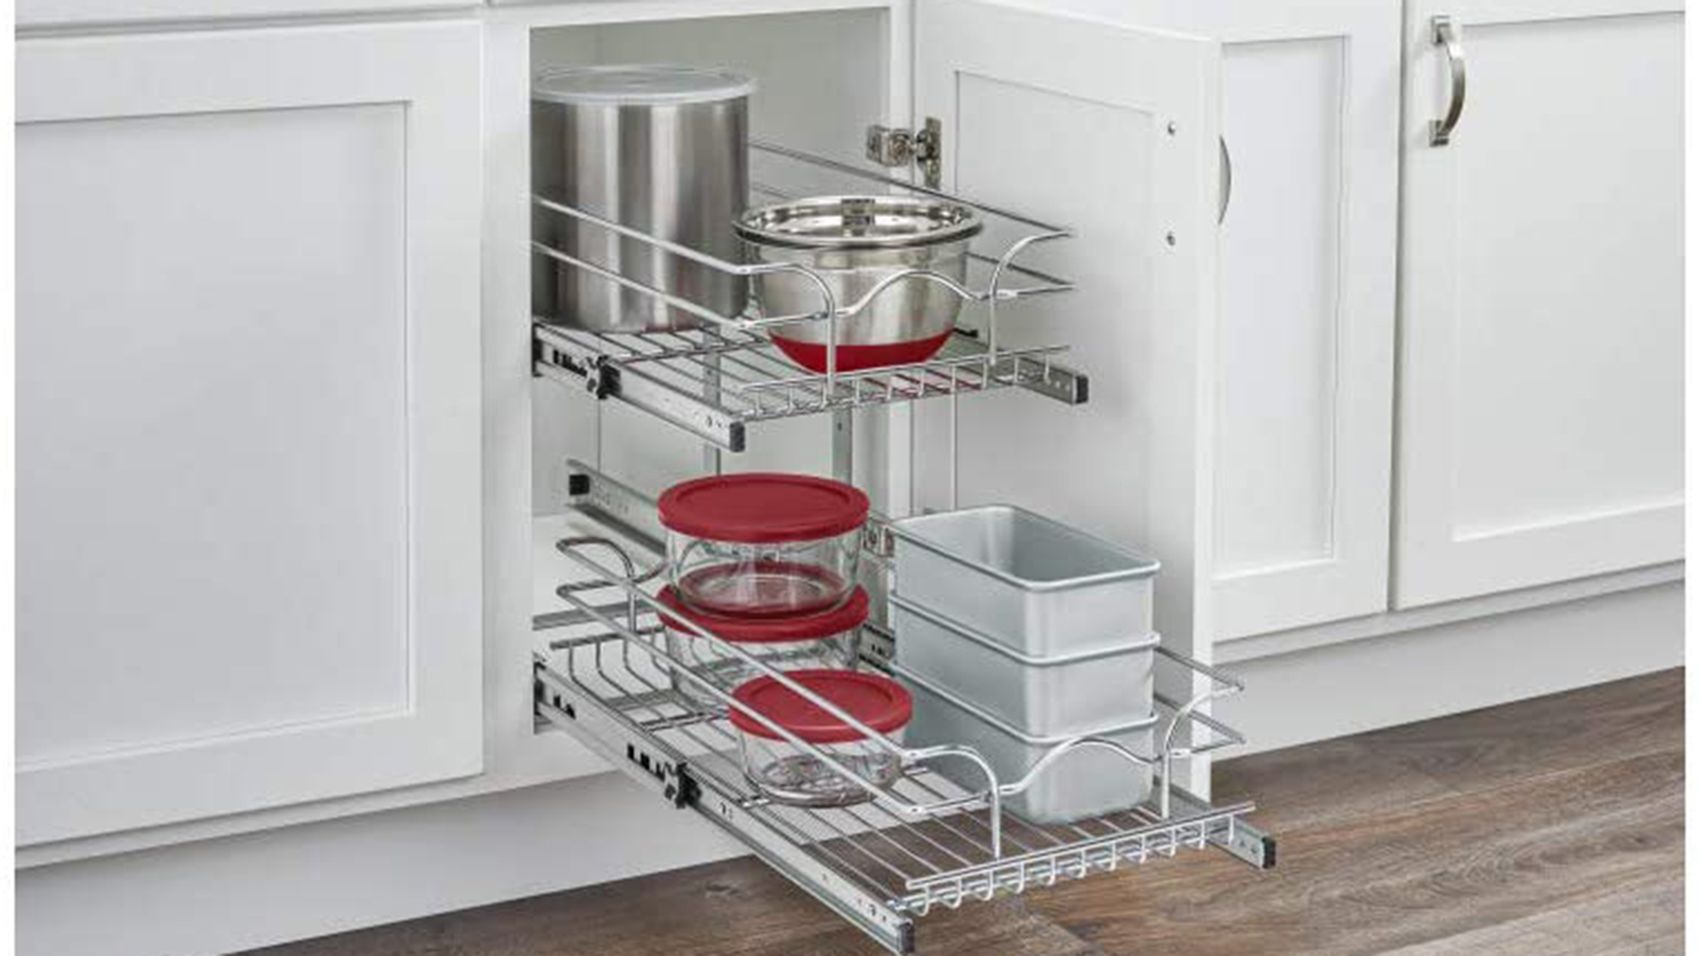 Kitchen Cabinet Organization Hack for Cords – The Cord Wrapper